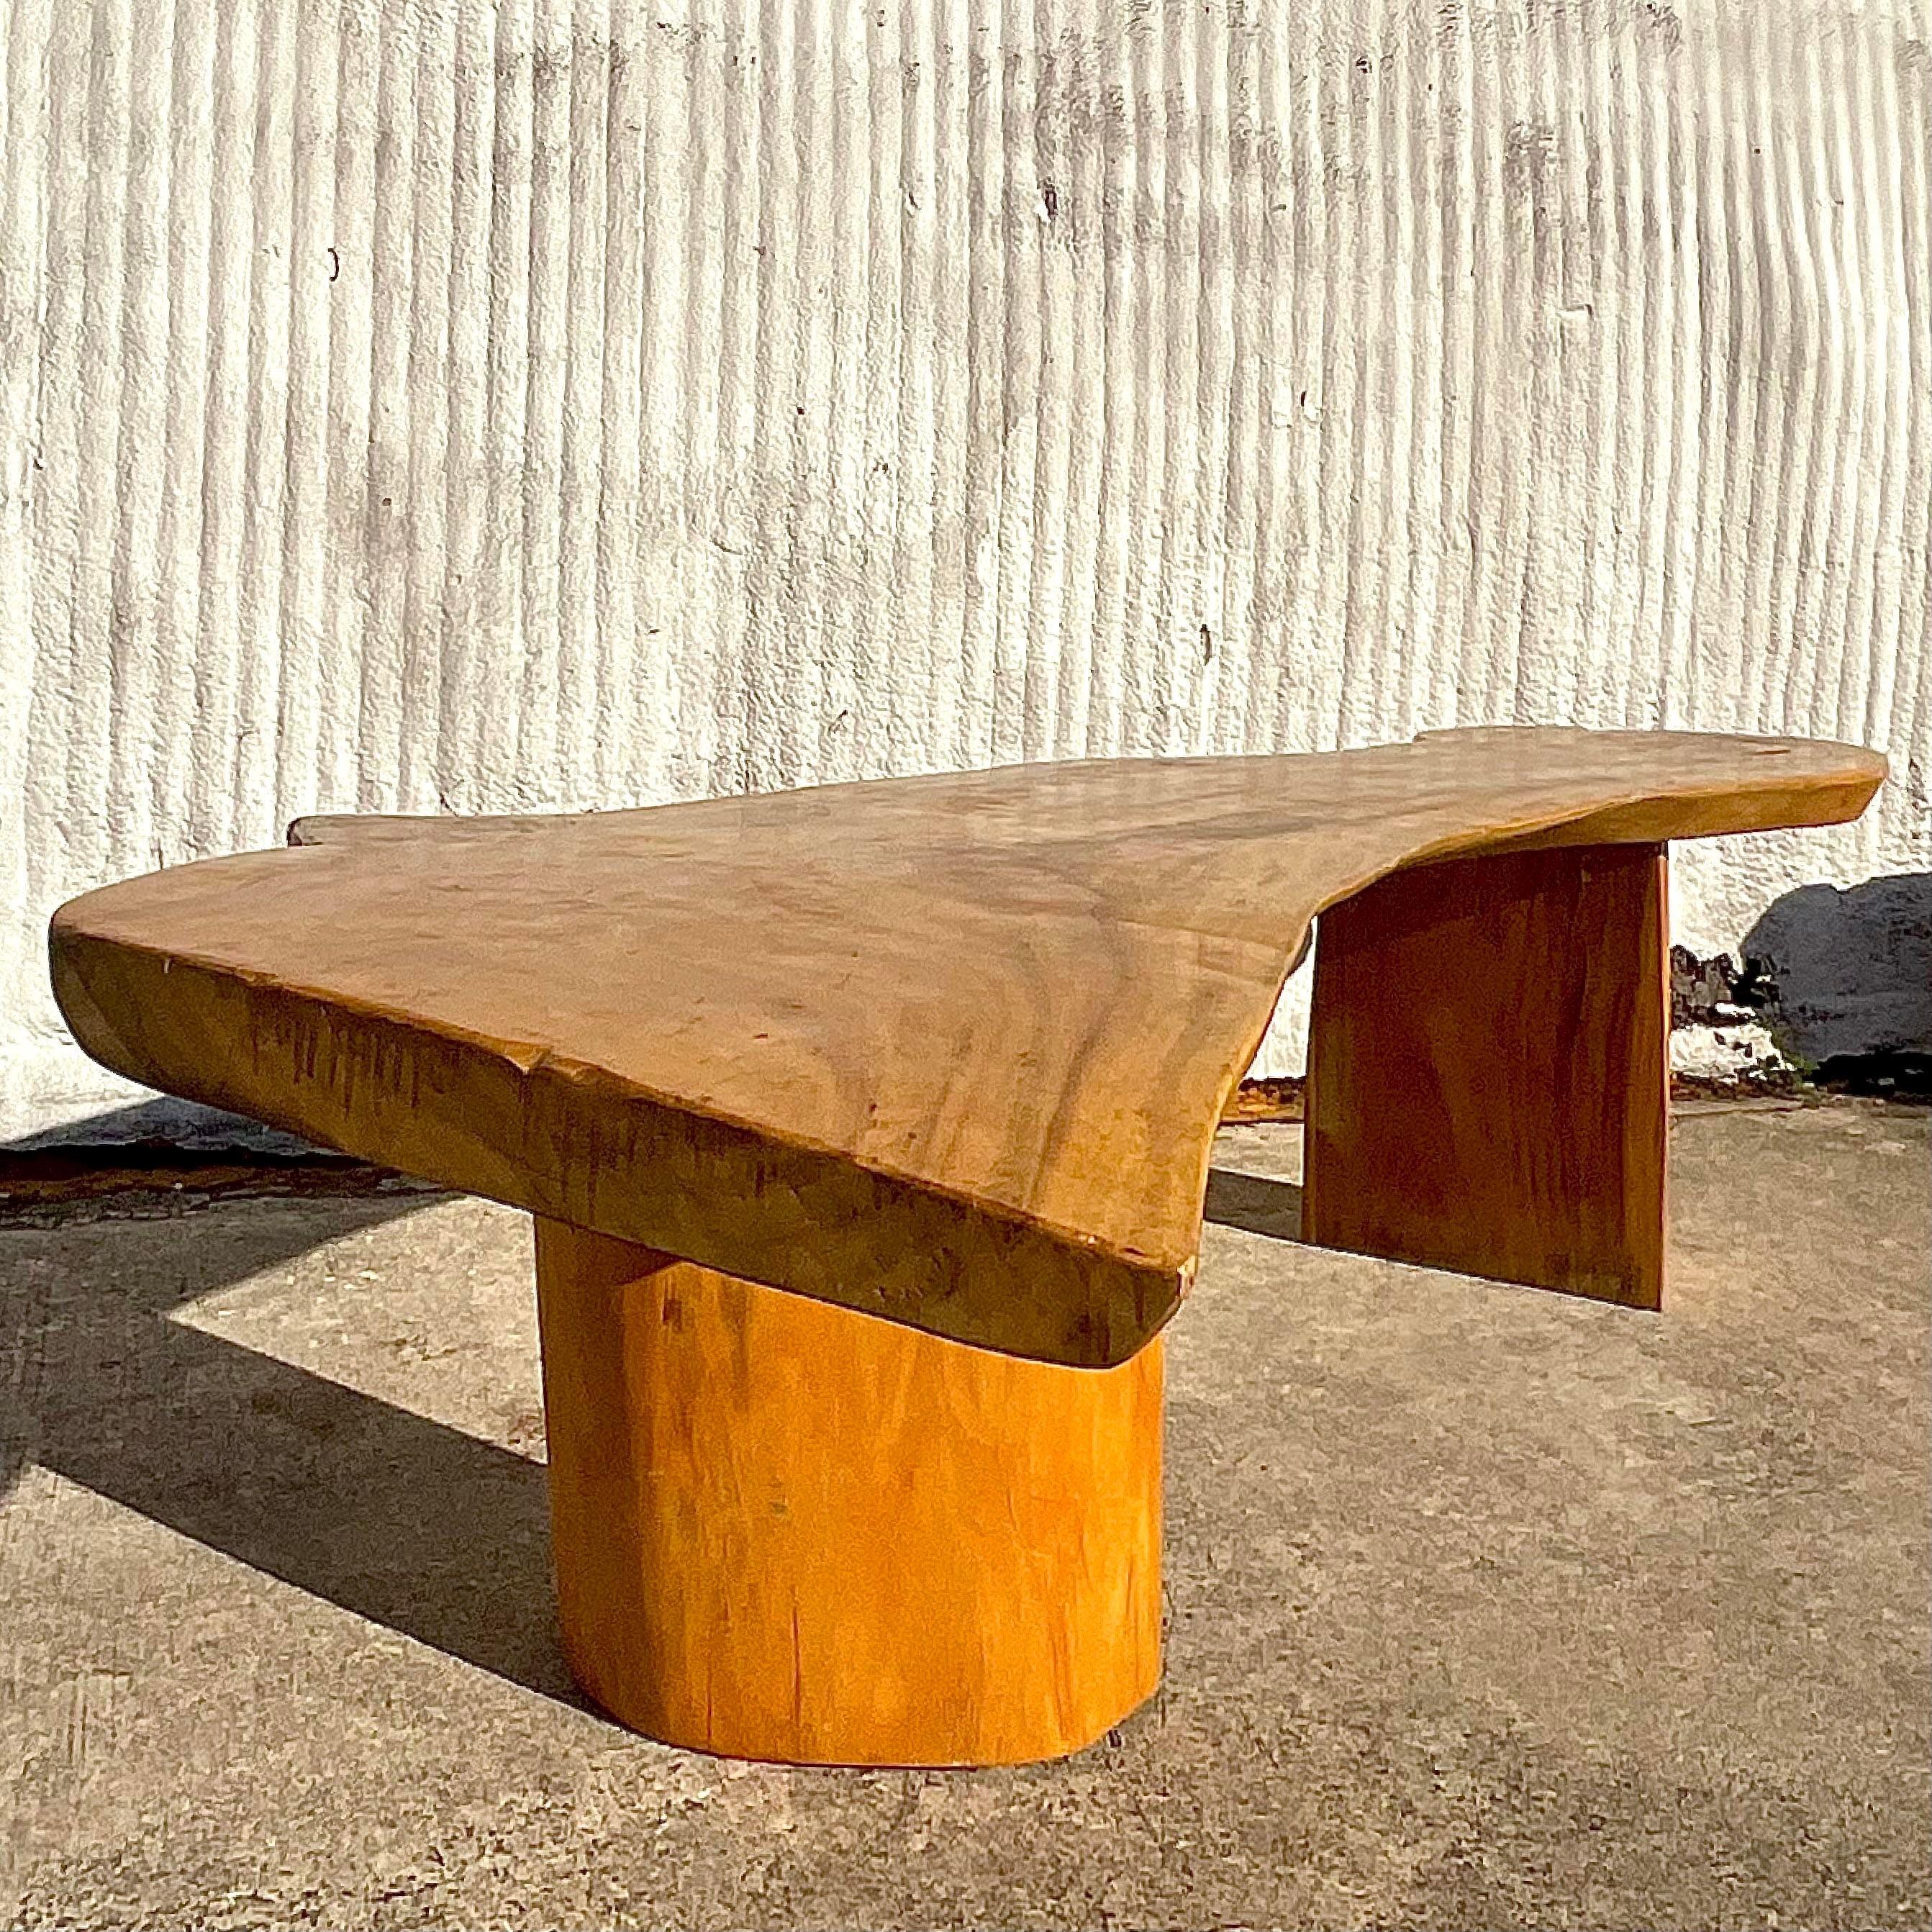 A fabulous vintage Boho console table. A chic solid wood slap top with beautiful wood grain detail. A gorgeous sloped wood top.makes this table a real showstopper. Acquired from a Palm Beach estate.